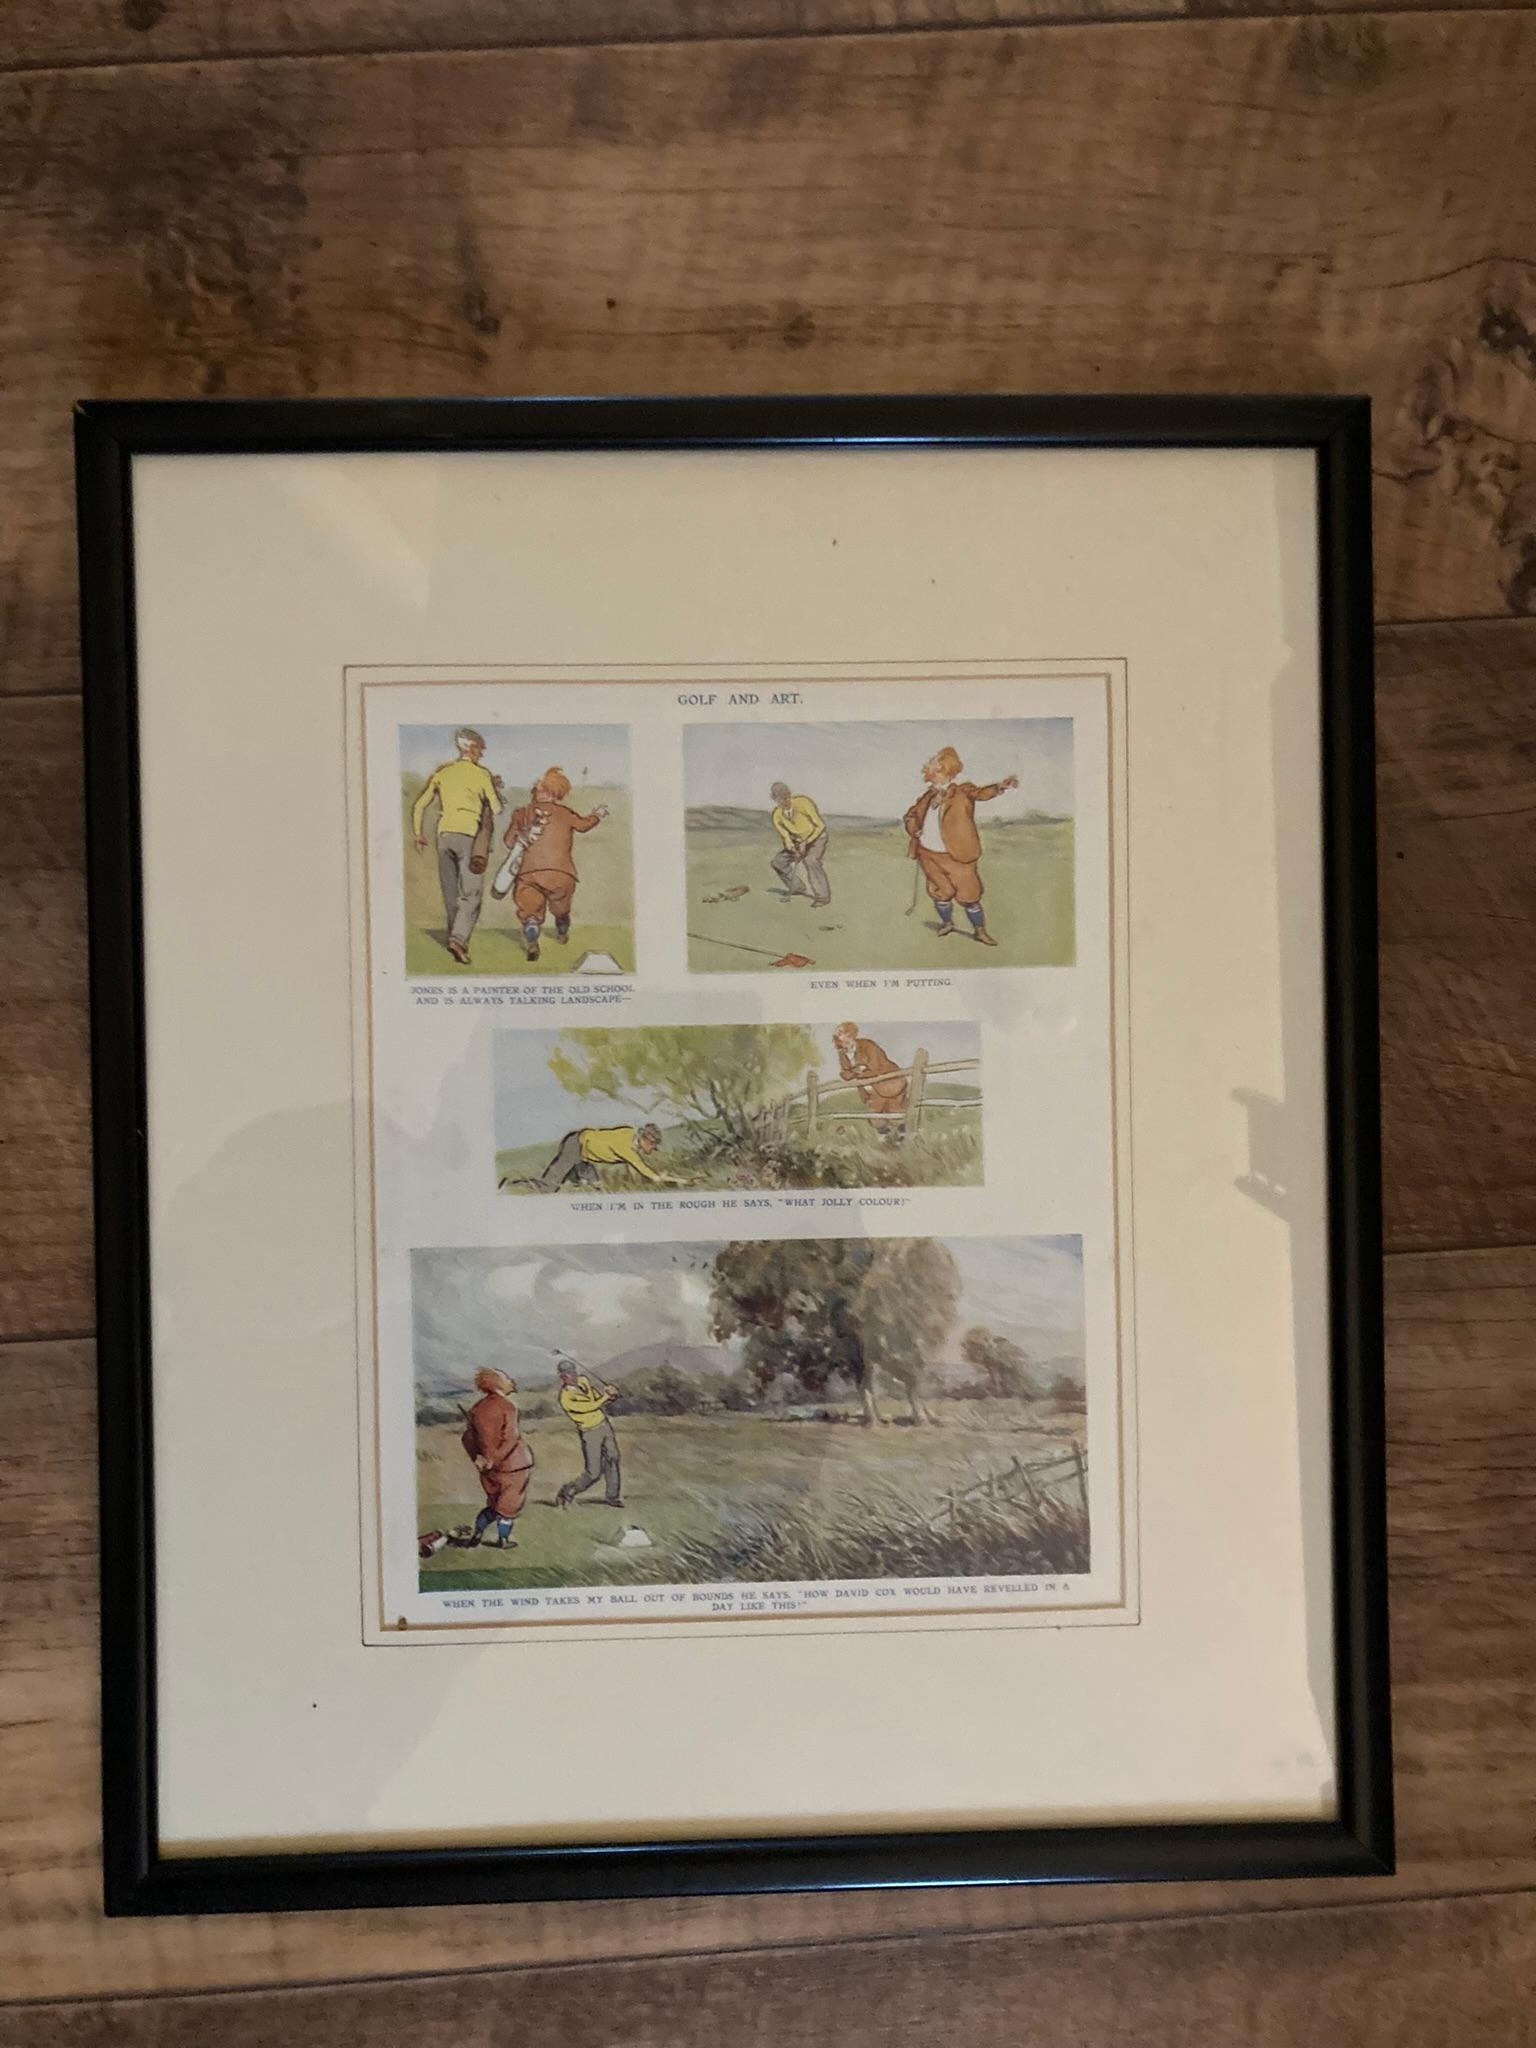 Enhance your living space with these captivating framed prints showcasing cartoon character Golfers. Created with meticulous attention to detail, these prints effortlessly bring life and character to any room. The combination of character and